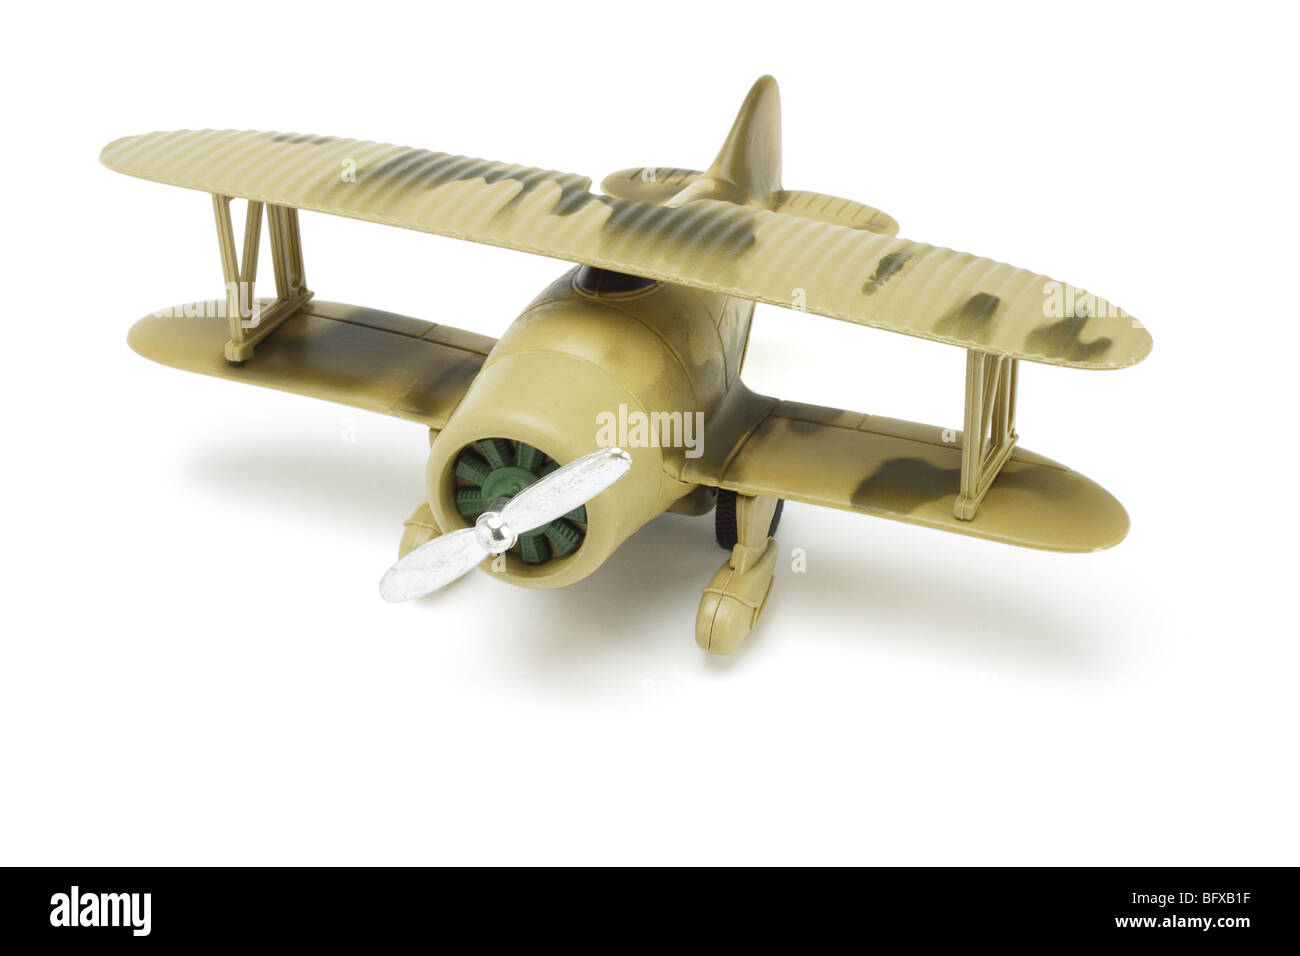 Toy military aircraft with camouflage paint on white background Stock Photo